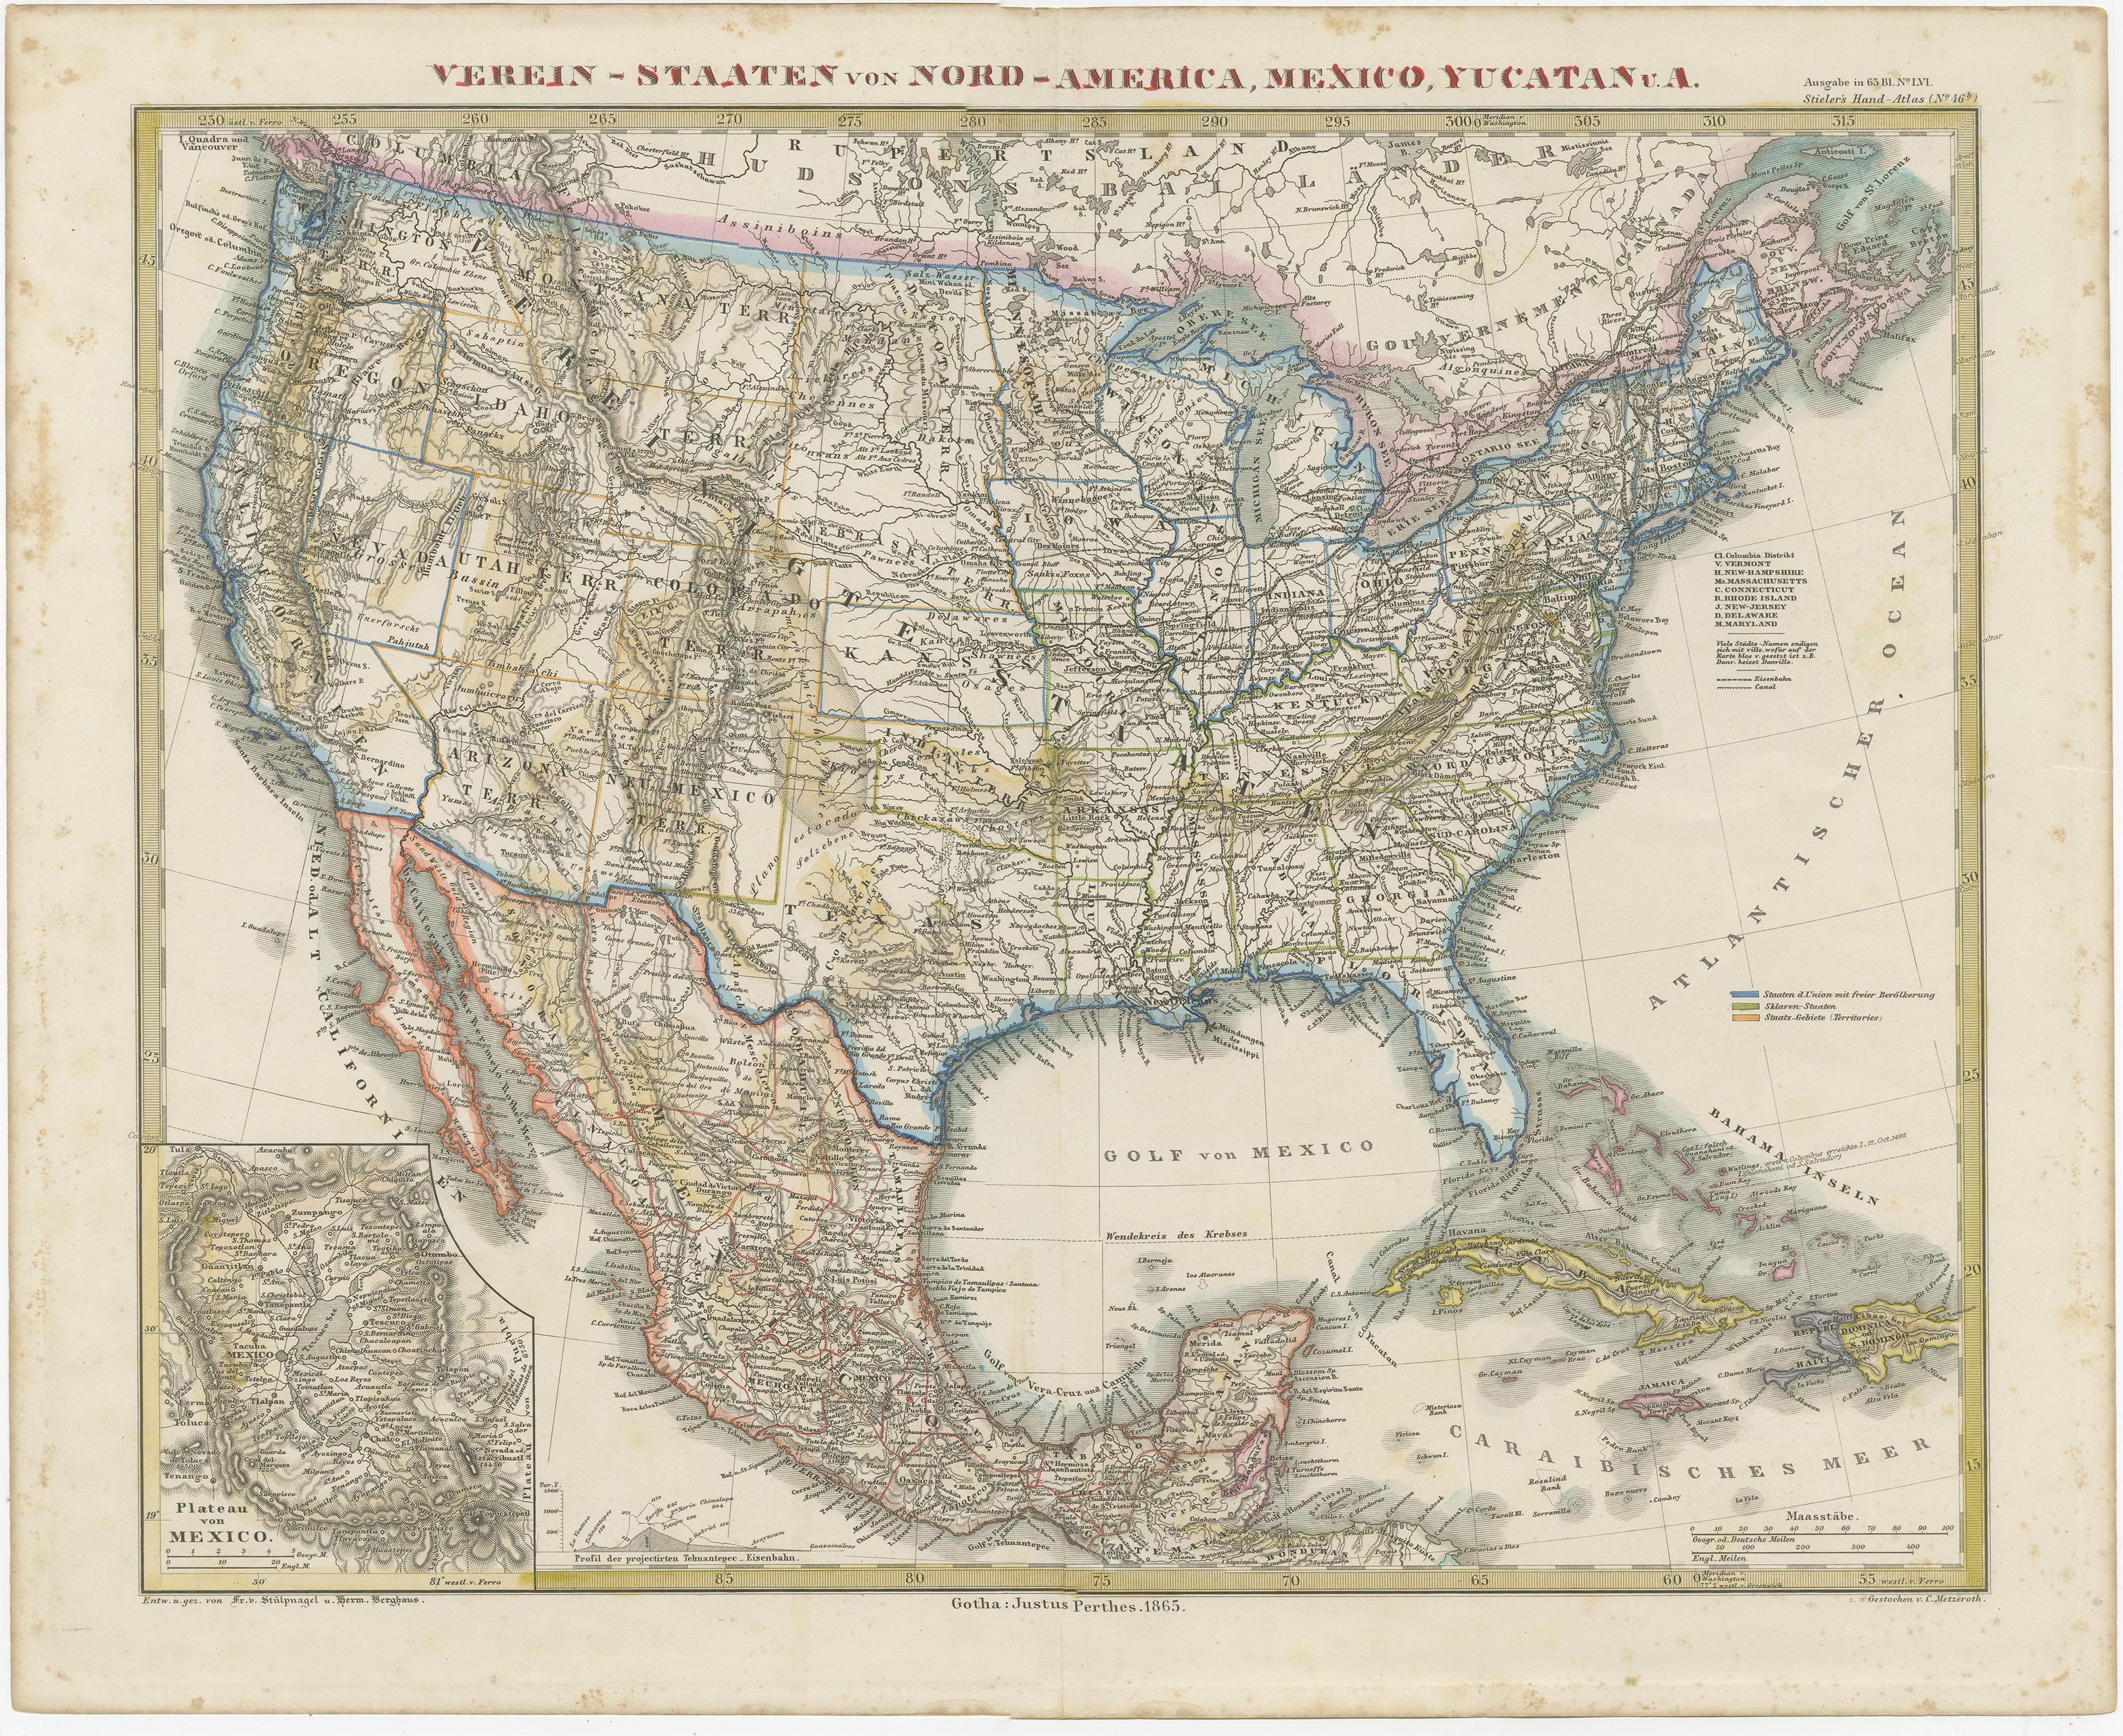 Antique map titled 'Verein-Staaten von Nord-America, Mexico, Yucatan u.a.'. Very detailed map of the United States of America showing the Caribbean. With an inset map of the surrounding area of Mexico city.

This map originates from Stielers